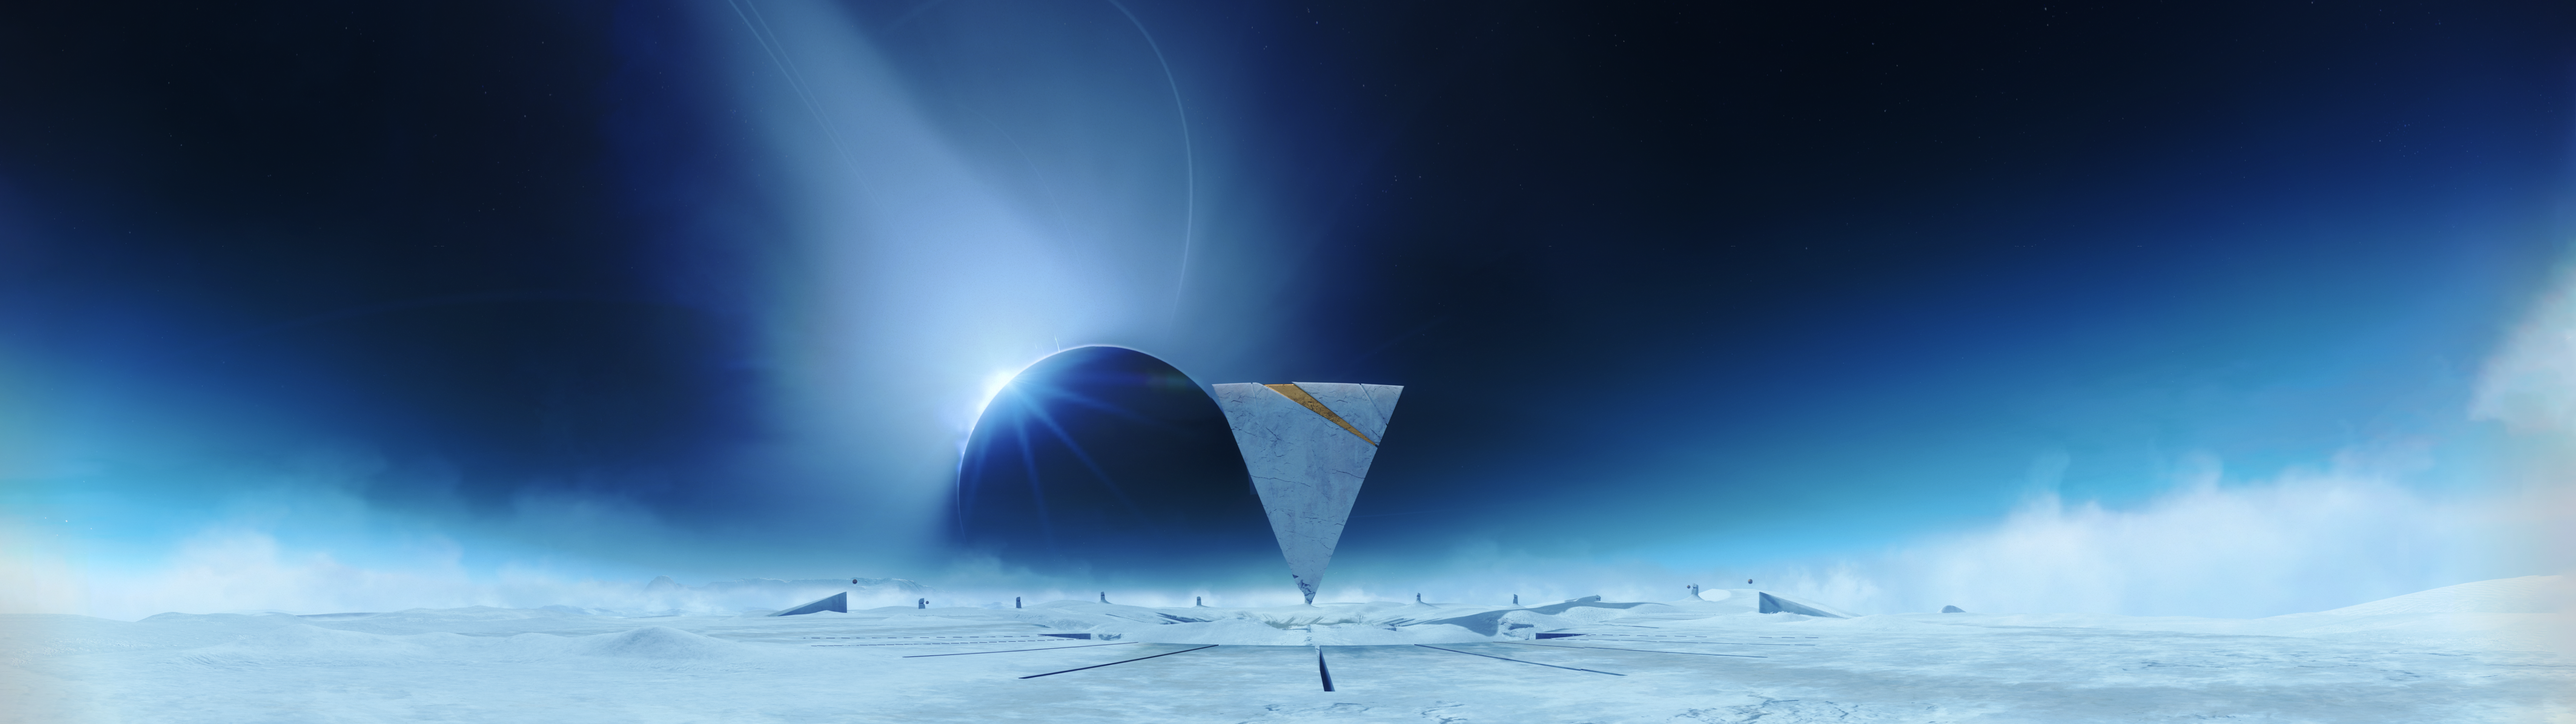 Destiny Dual Monitor Wallpapers